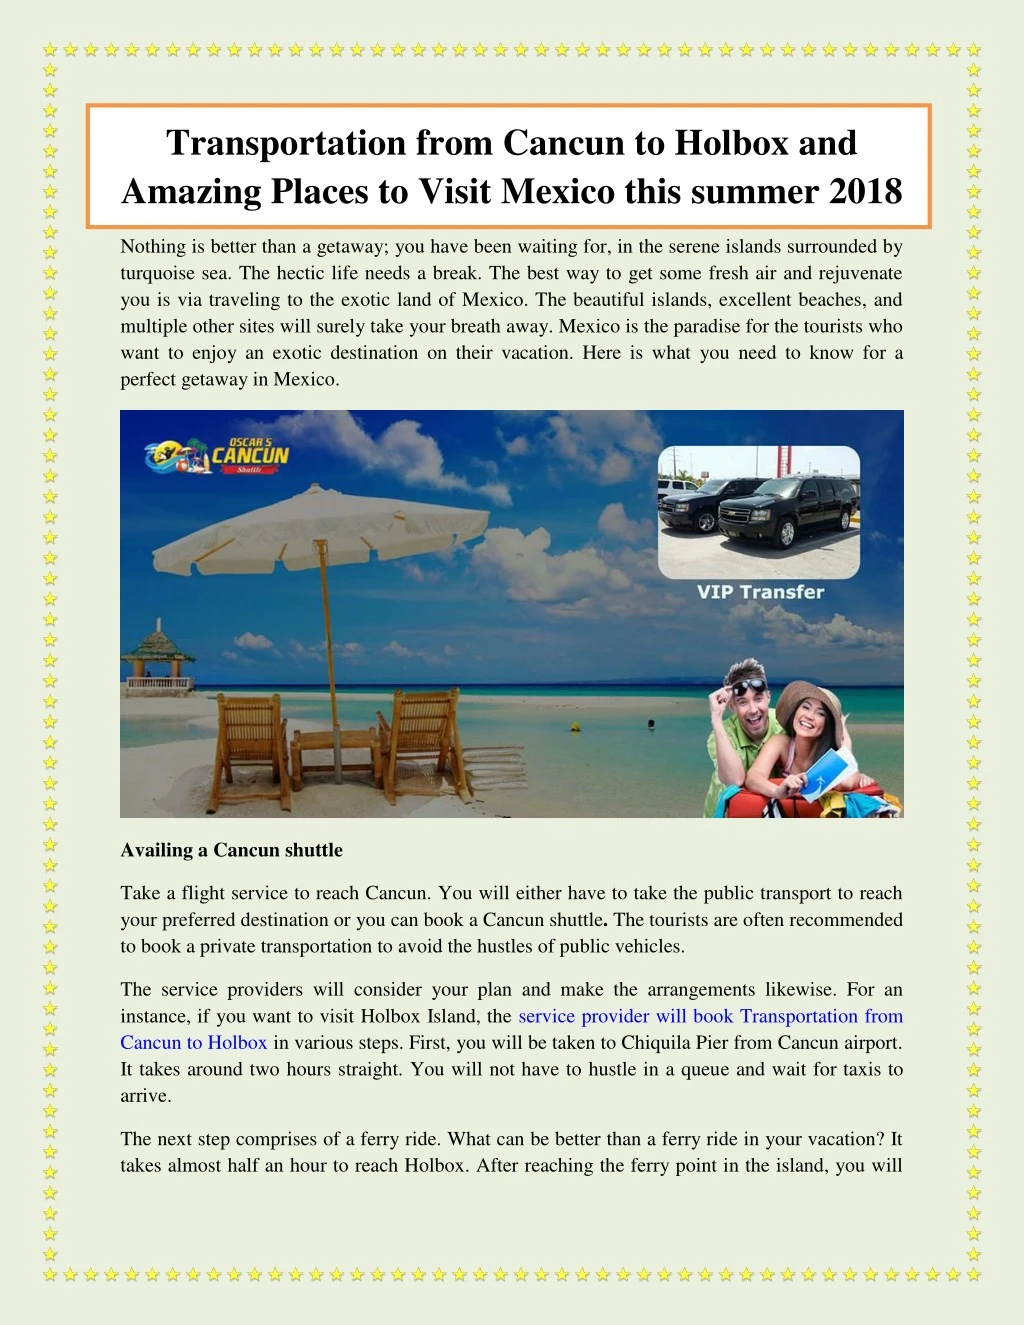 transportation from cancun to holbox and amazing